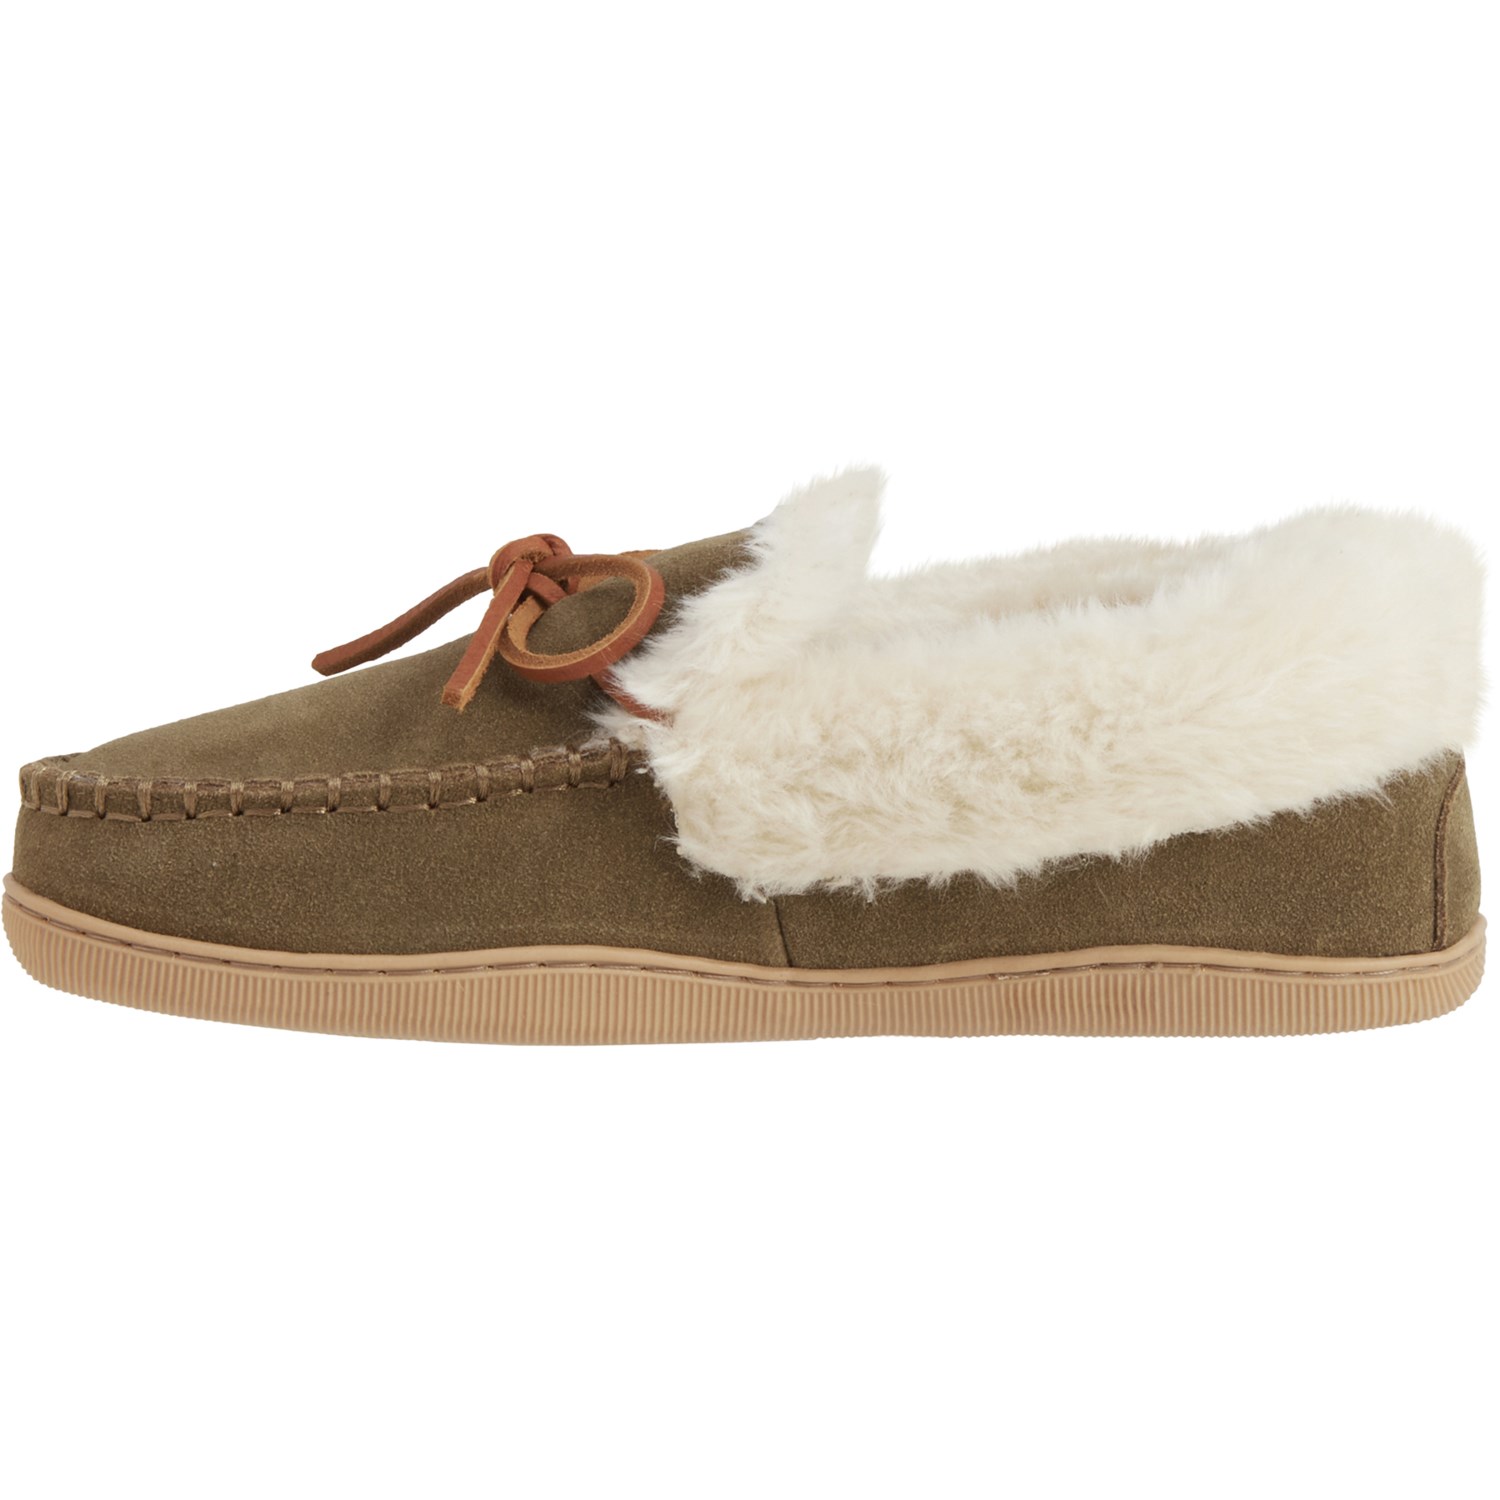 Clarks Suede Moccasins (For Women) - Save 48%